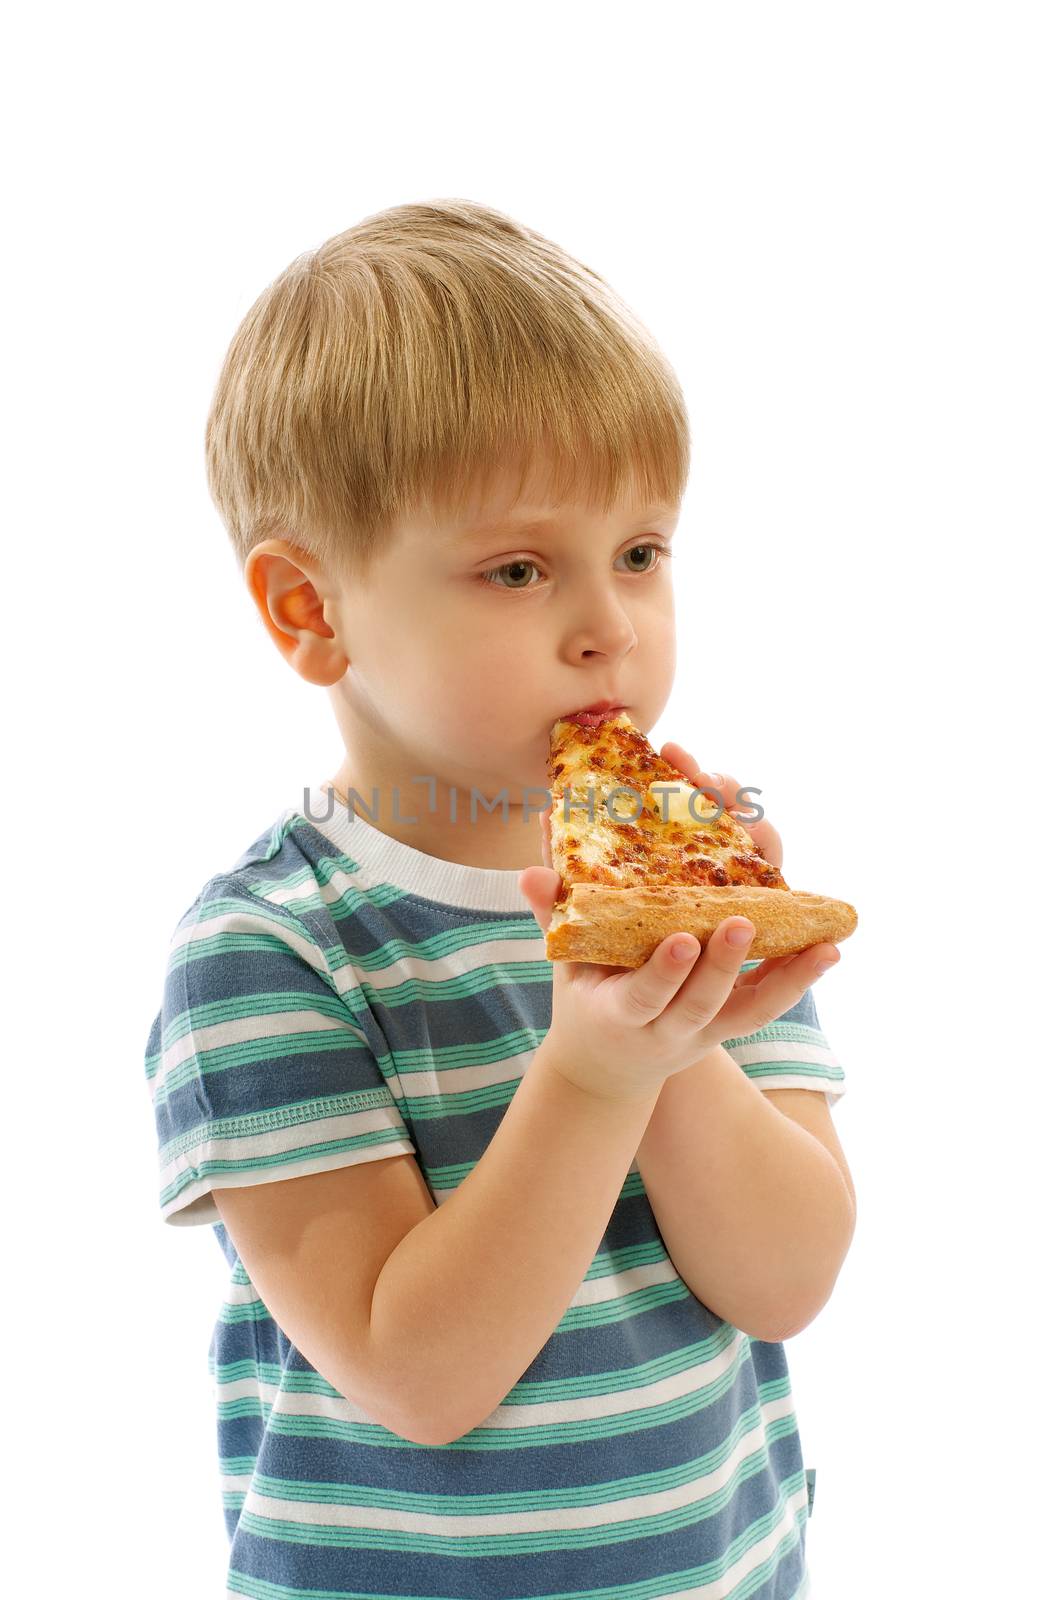 Cute Little Boy in Striped T-Short Eating Slice of Cheese Pizza isolated on white background